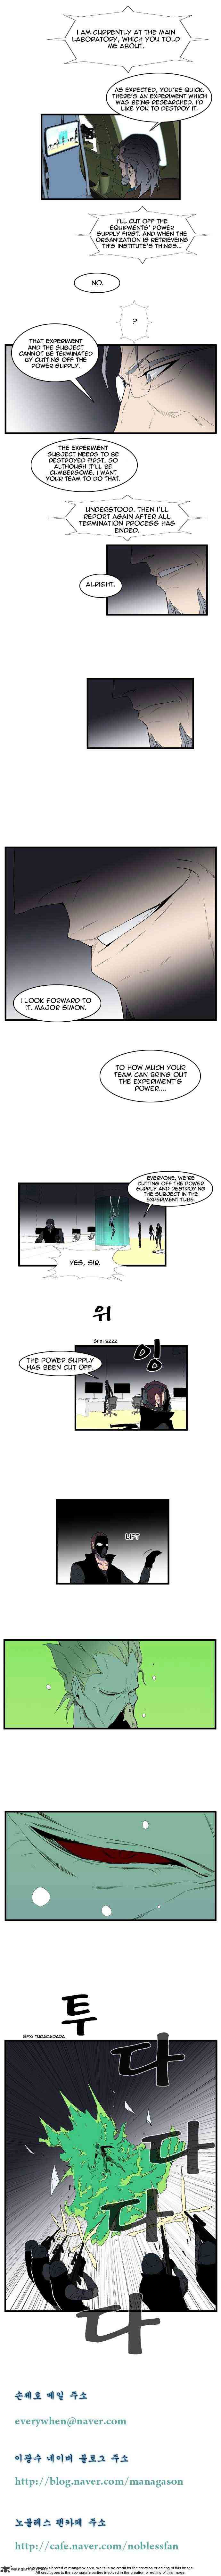 Noblesse Chapter 76 _ Chapters 76-90 page 57